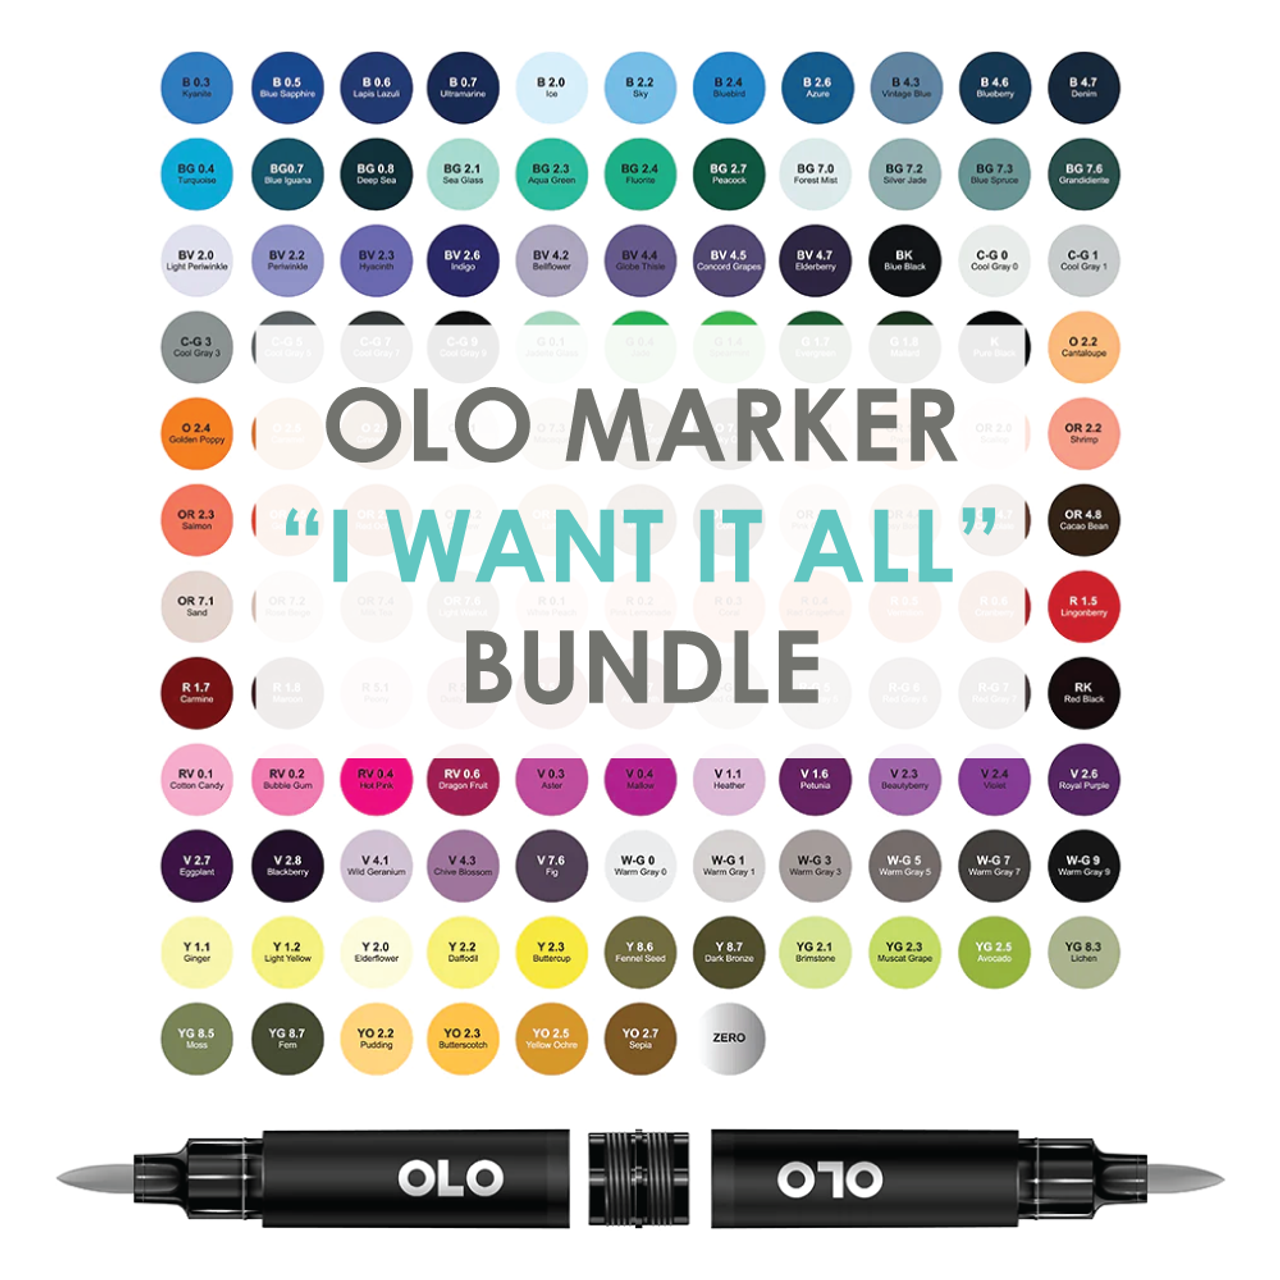 OLO Brush Markers